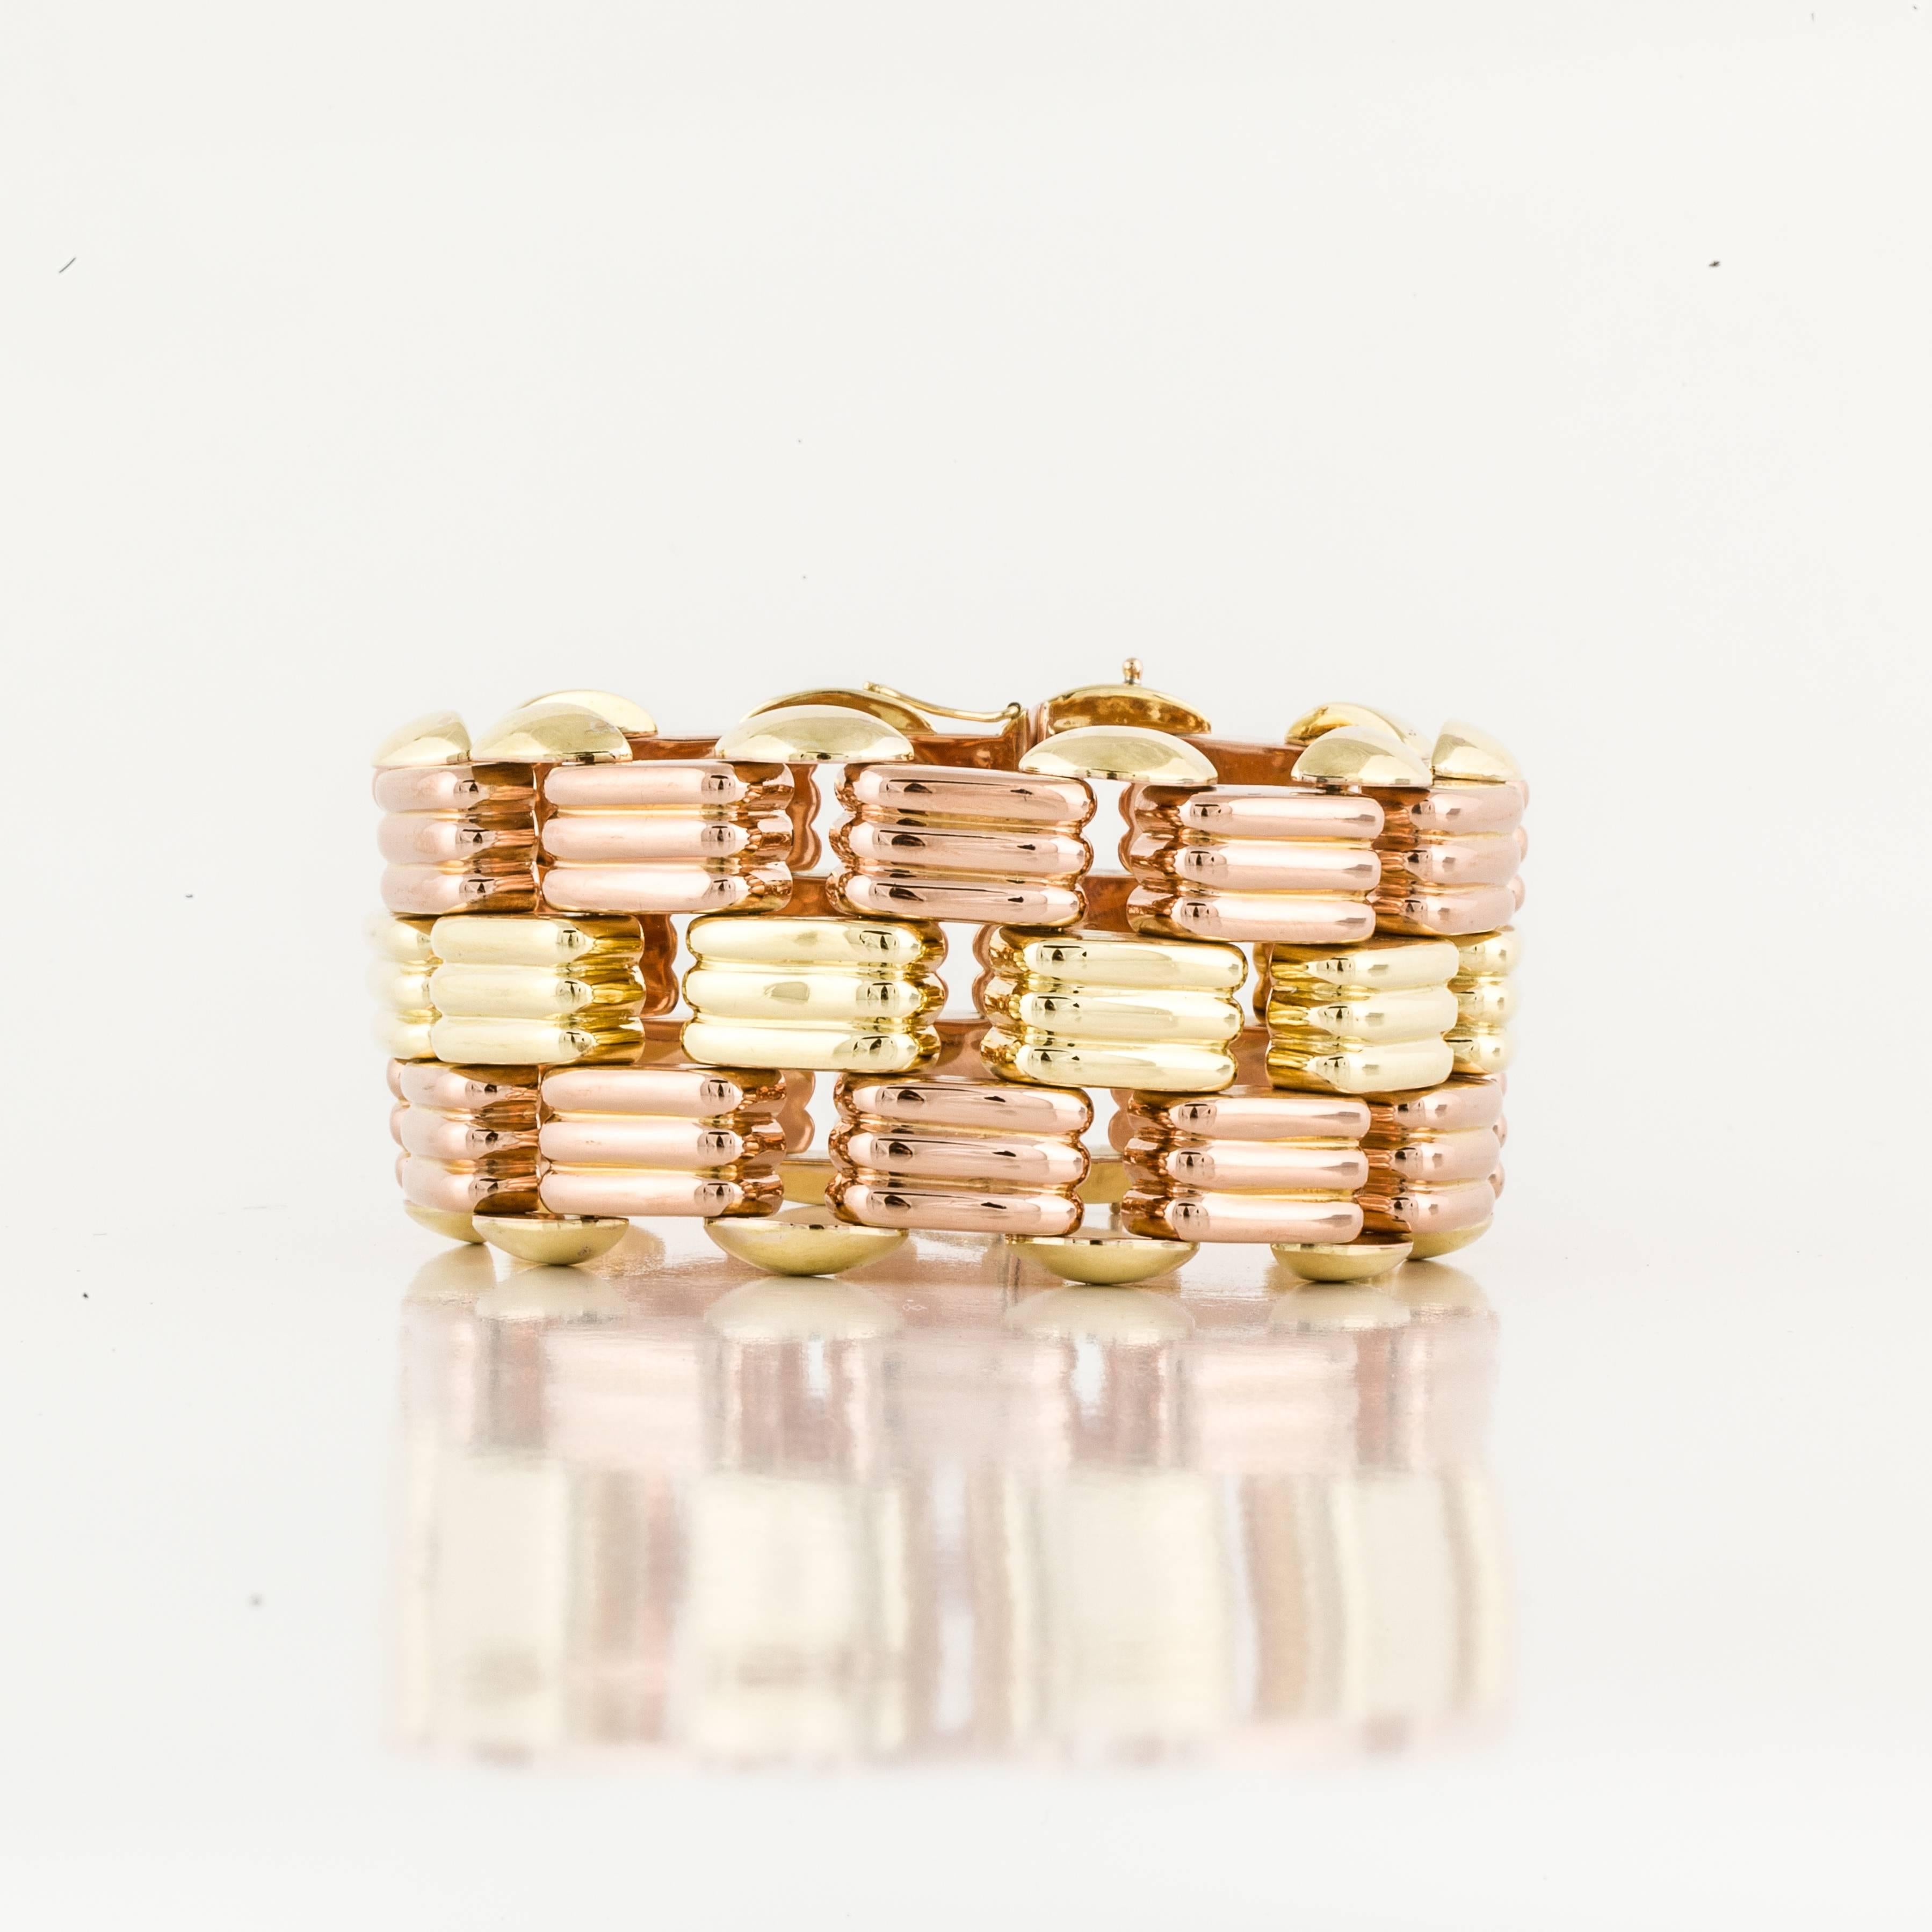 Retro bracelet crafted in 18K rose and yellow gold. Marked 